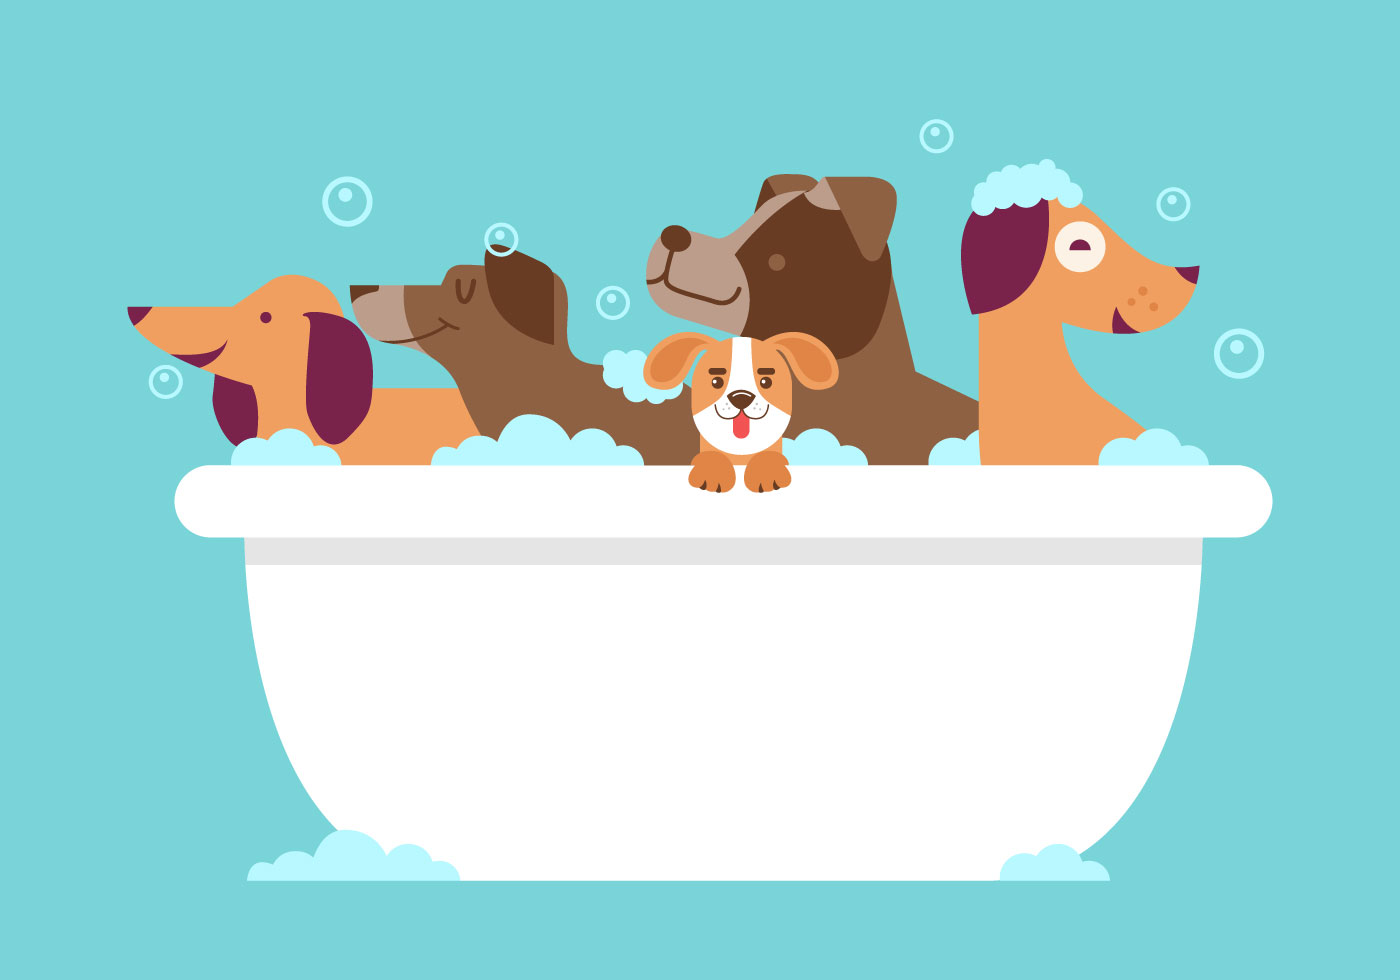 free vector clipart dogs - photo #12